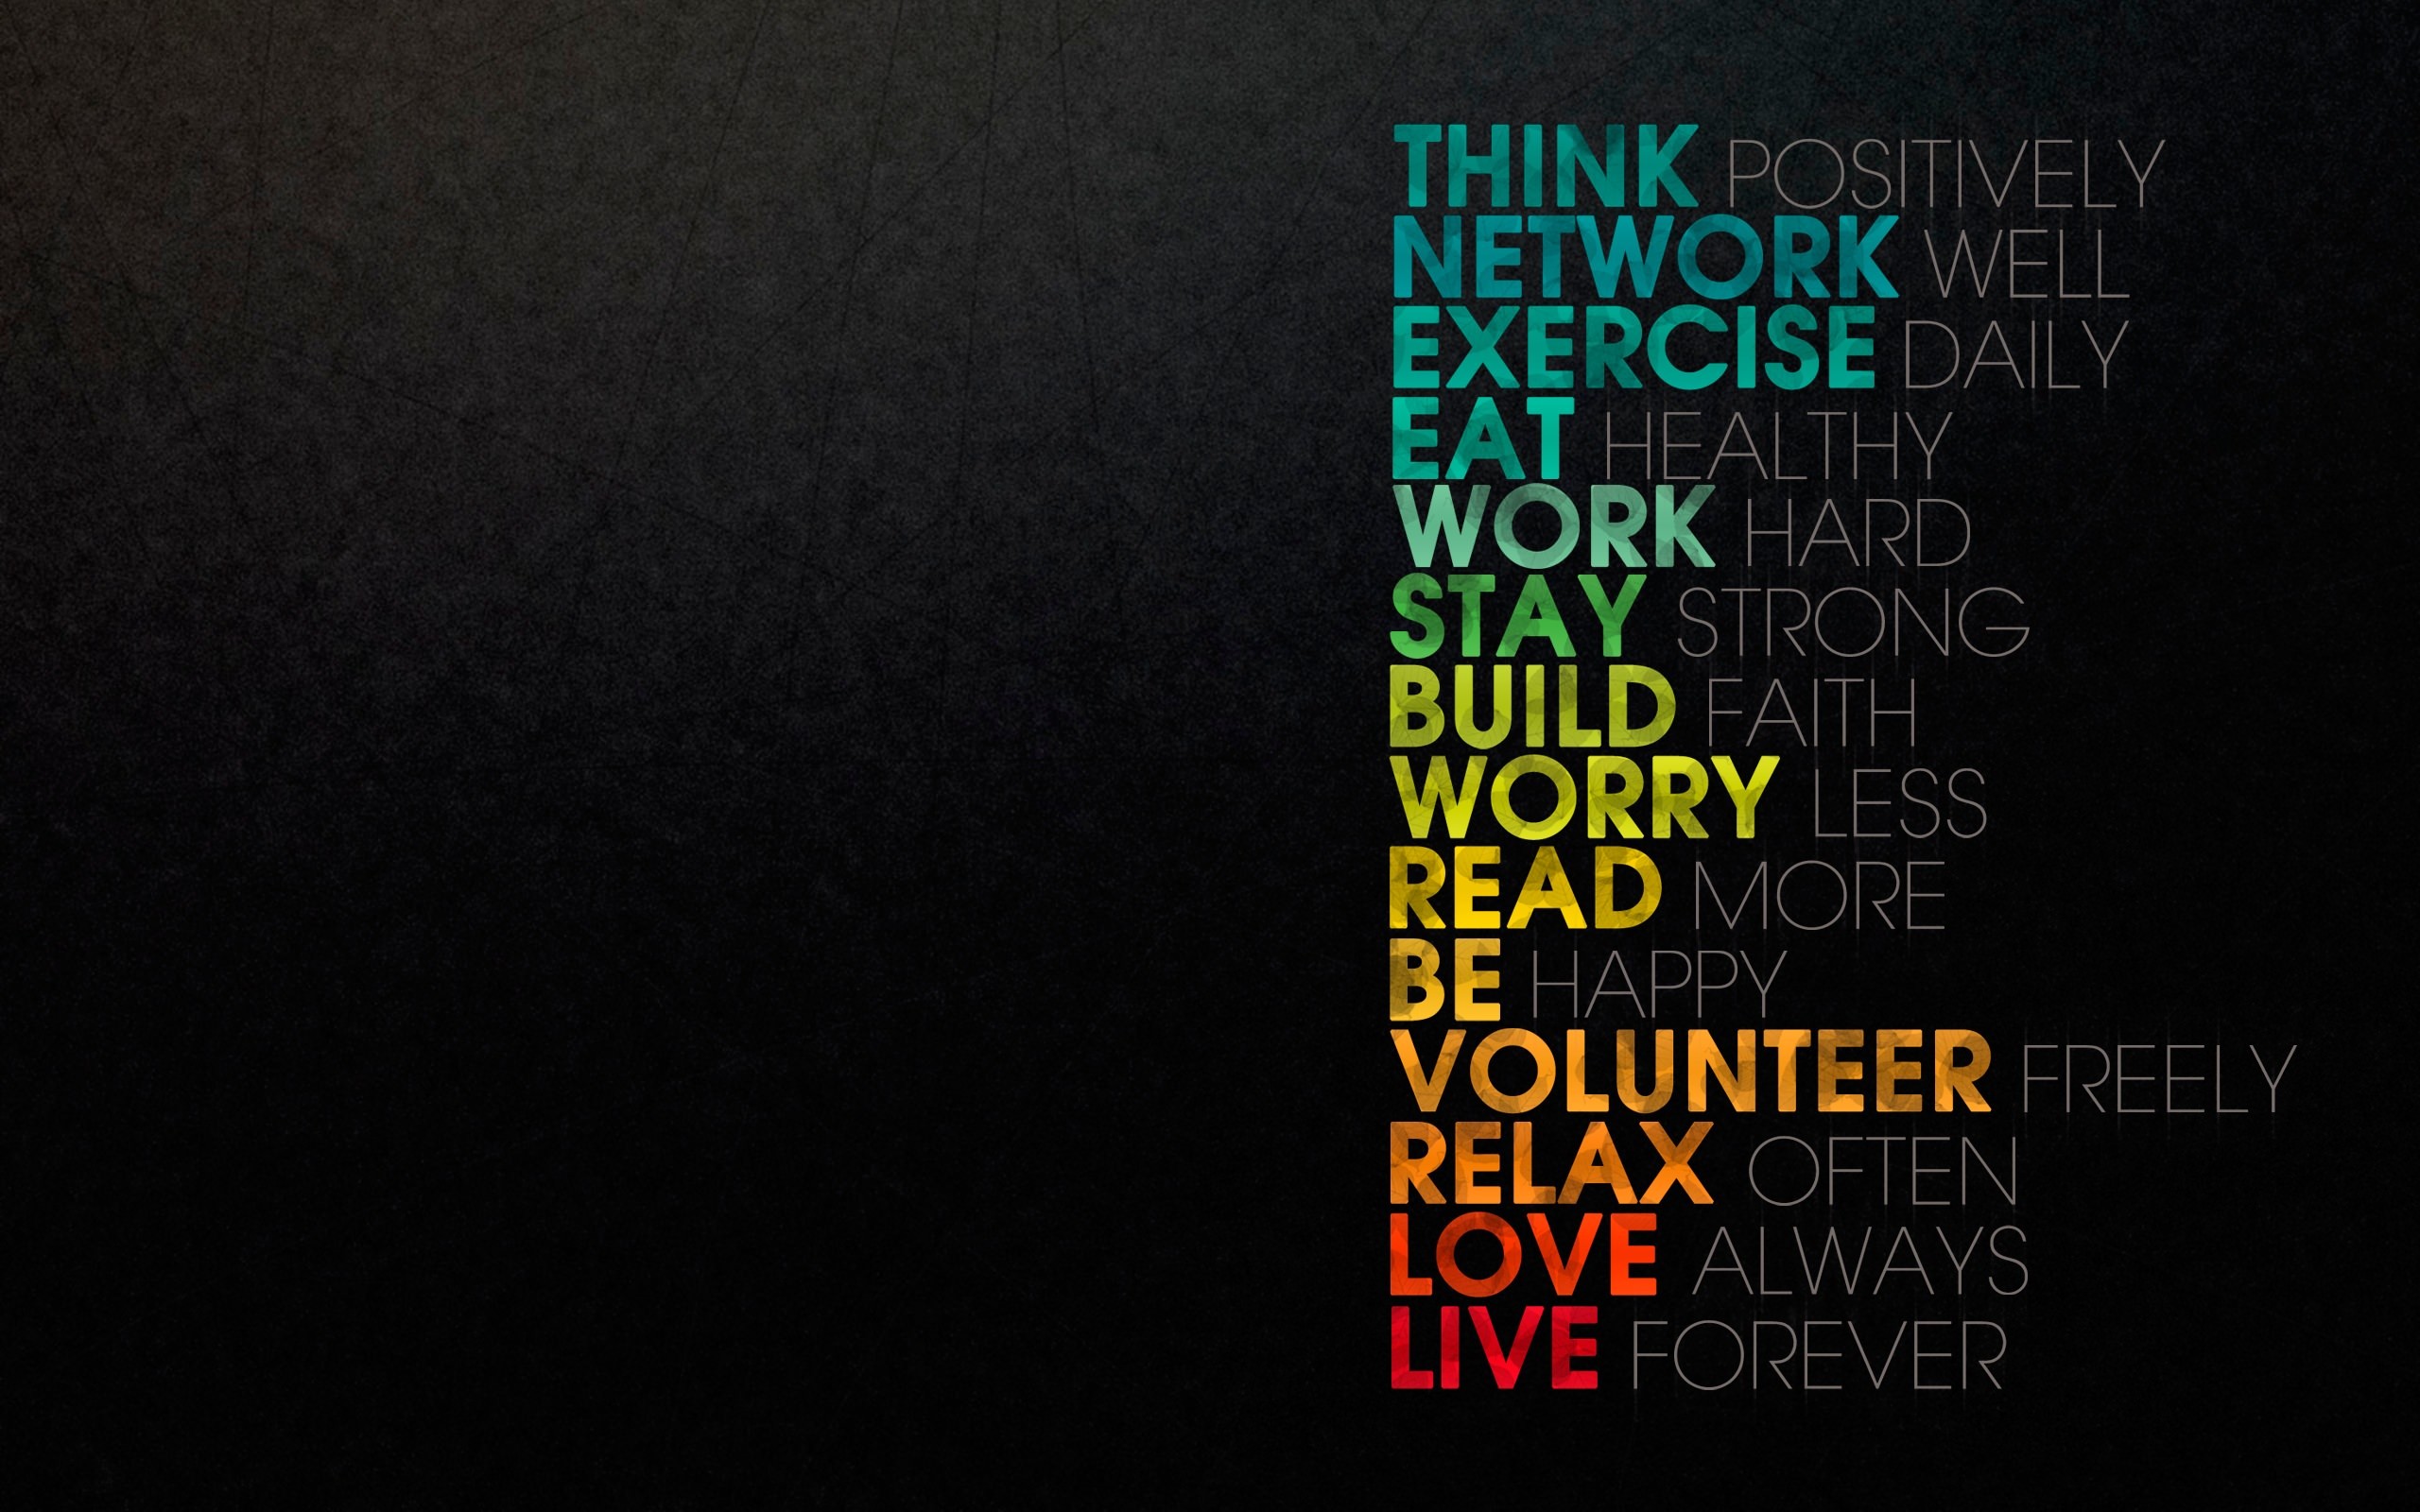 2560x1600 think positively network well poster - Google Search Â· Motivational  WallpaperWallpaper ...